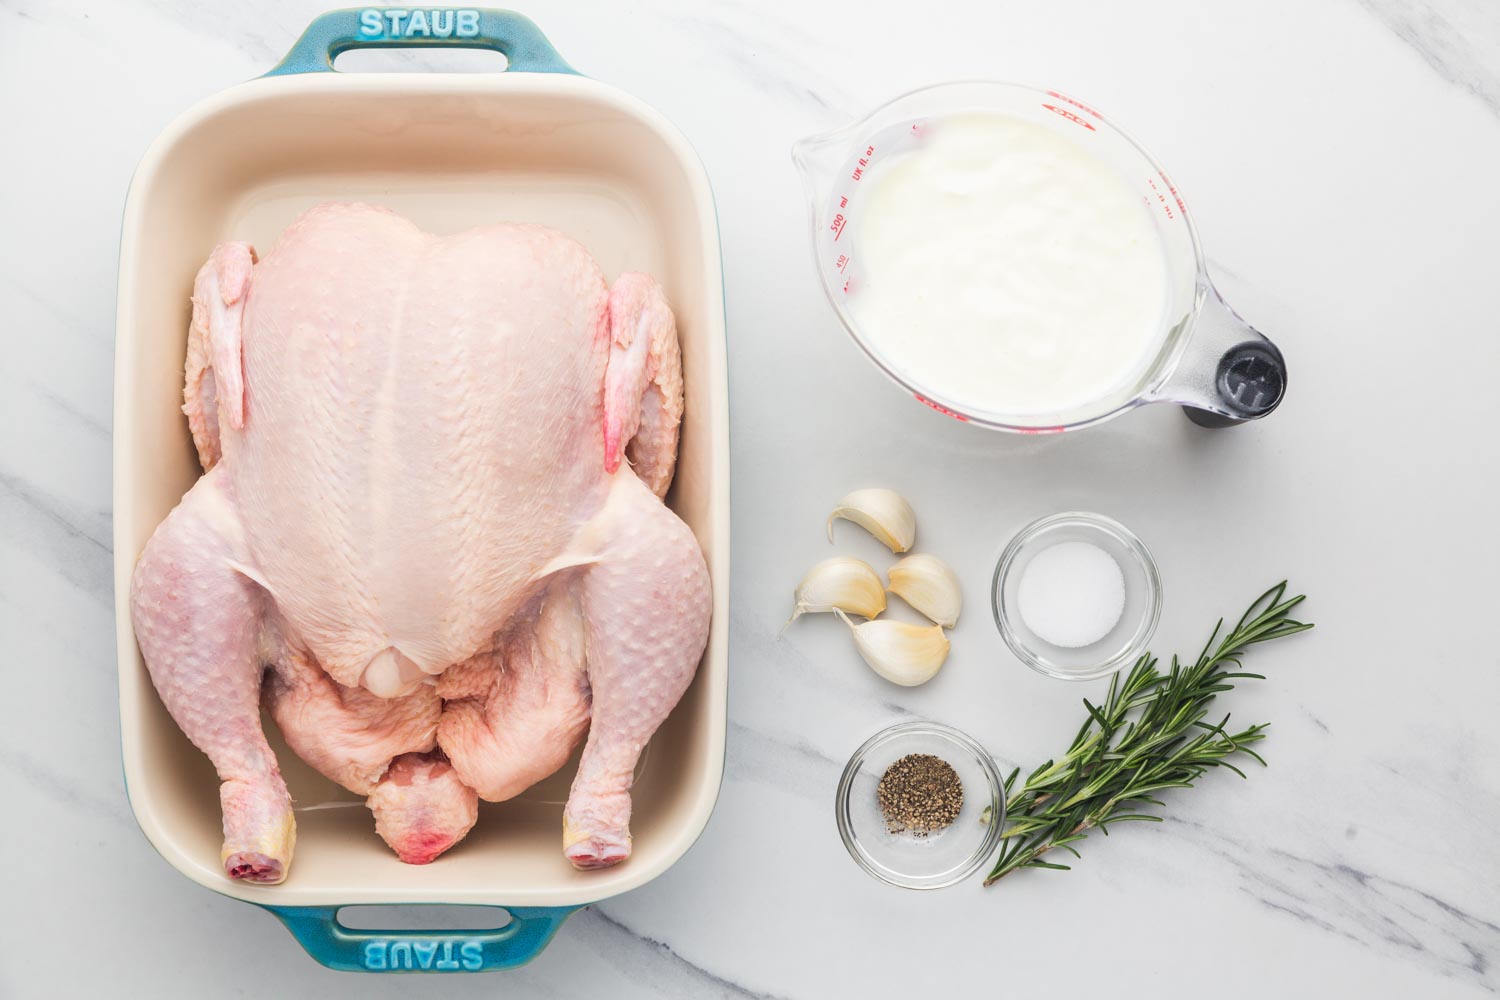 Ingredients needed to marinate a chicken in buttermilk including a whole chicken, buttermilk, garlic, rosemary, salt and pepper.